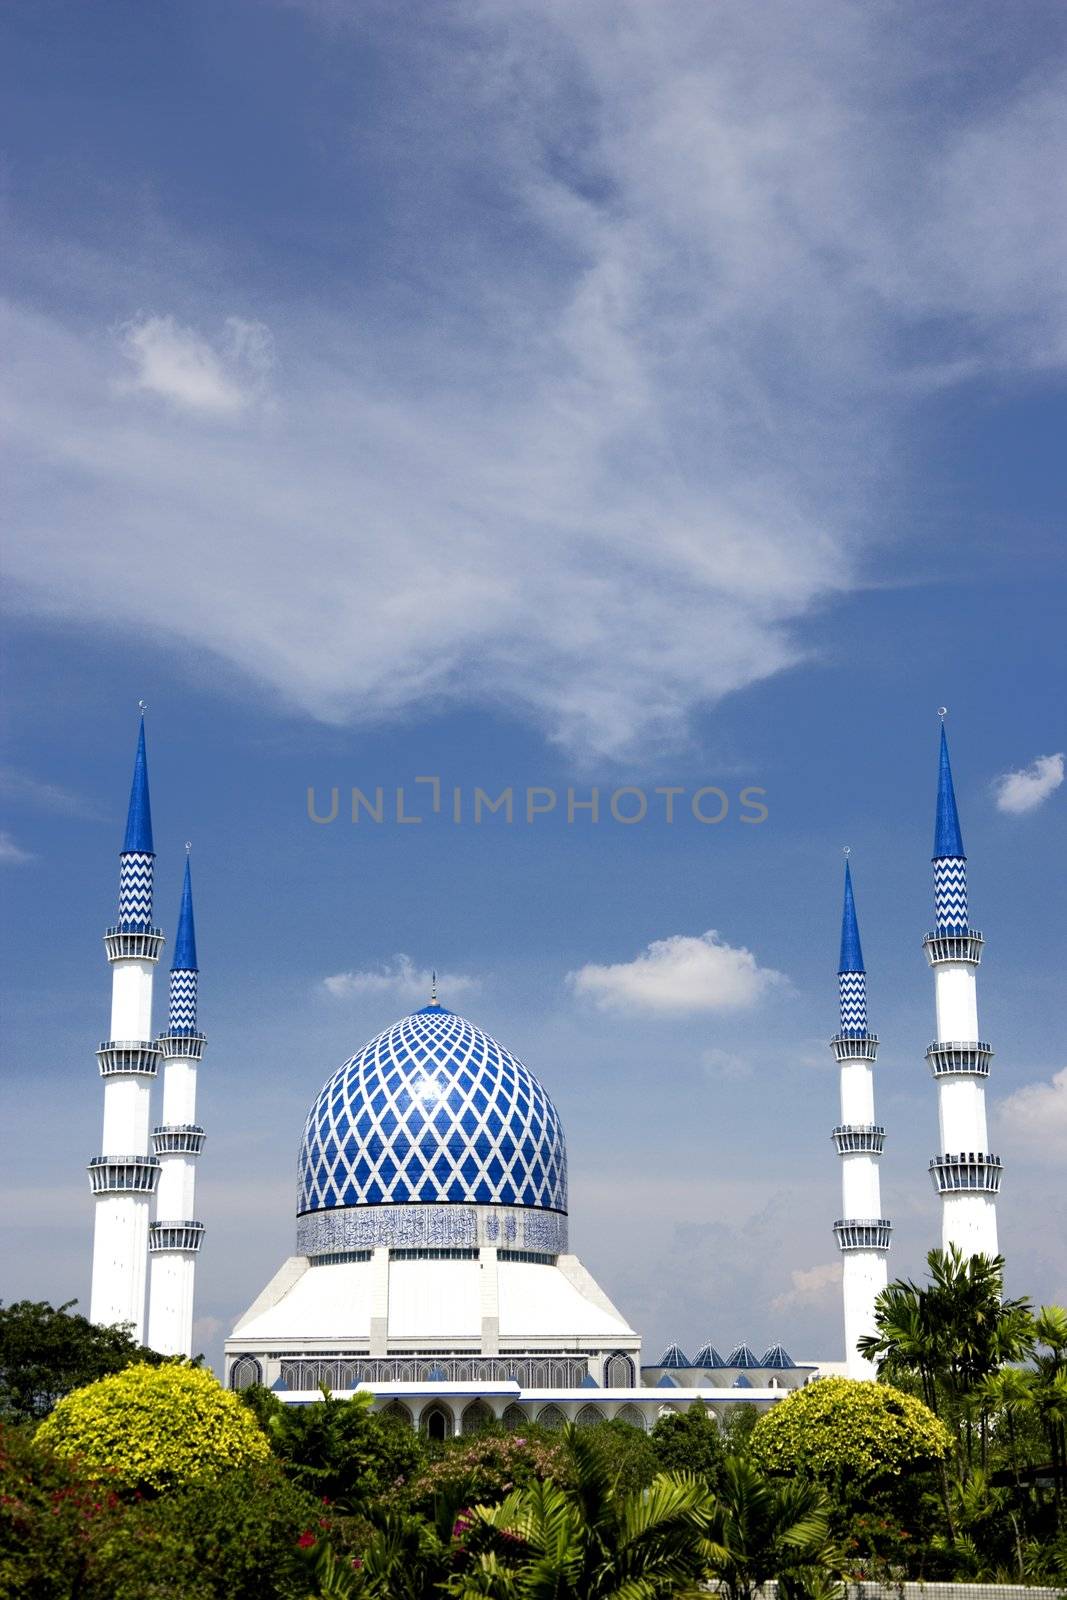 Sultan Salahuddin Abdul Aziz Shah Mosque or commonly known as the Blue Mosque, located at Shah Alam, Selangor, Malaysia.